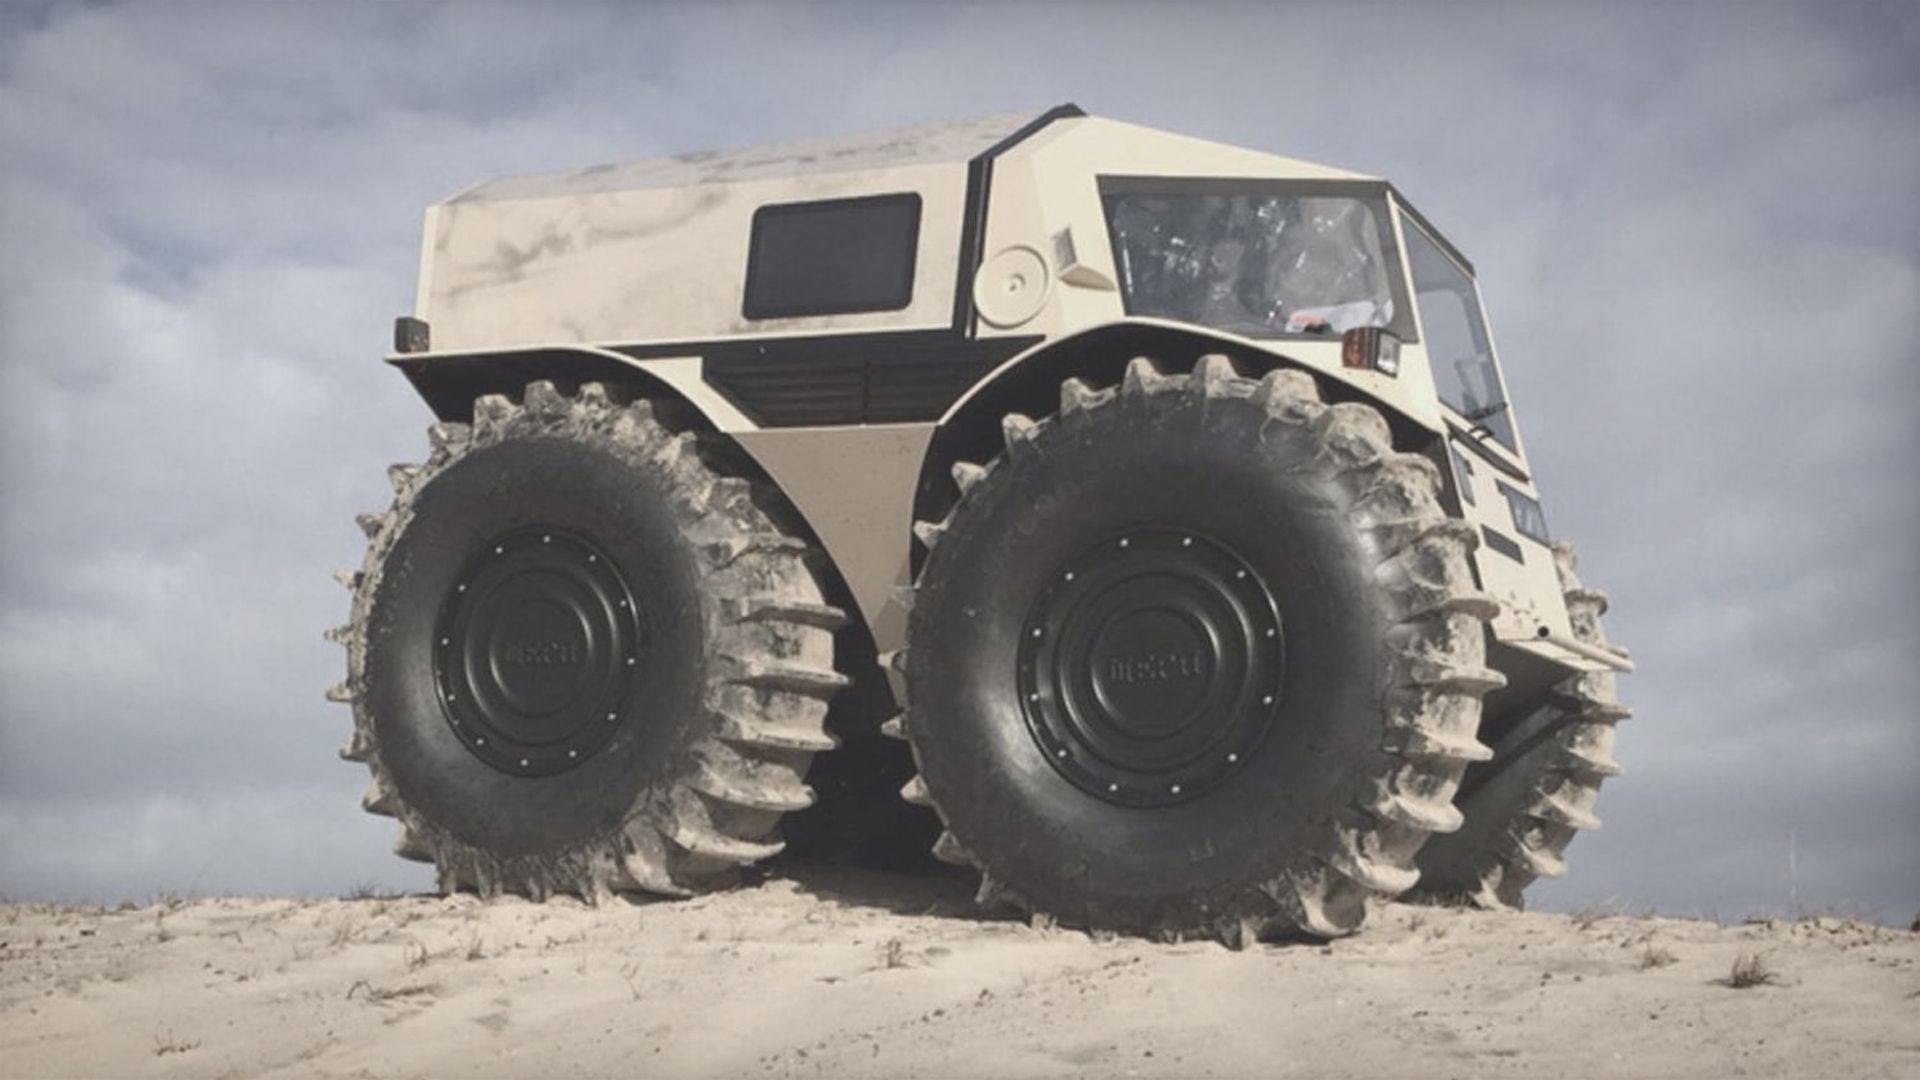 The Russian Sherp Looks Like a Micro Machine, But is Actually One Tough Truck